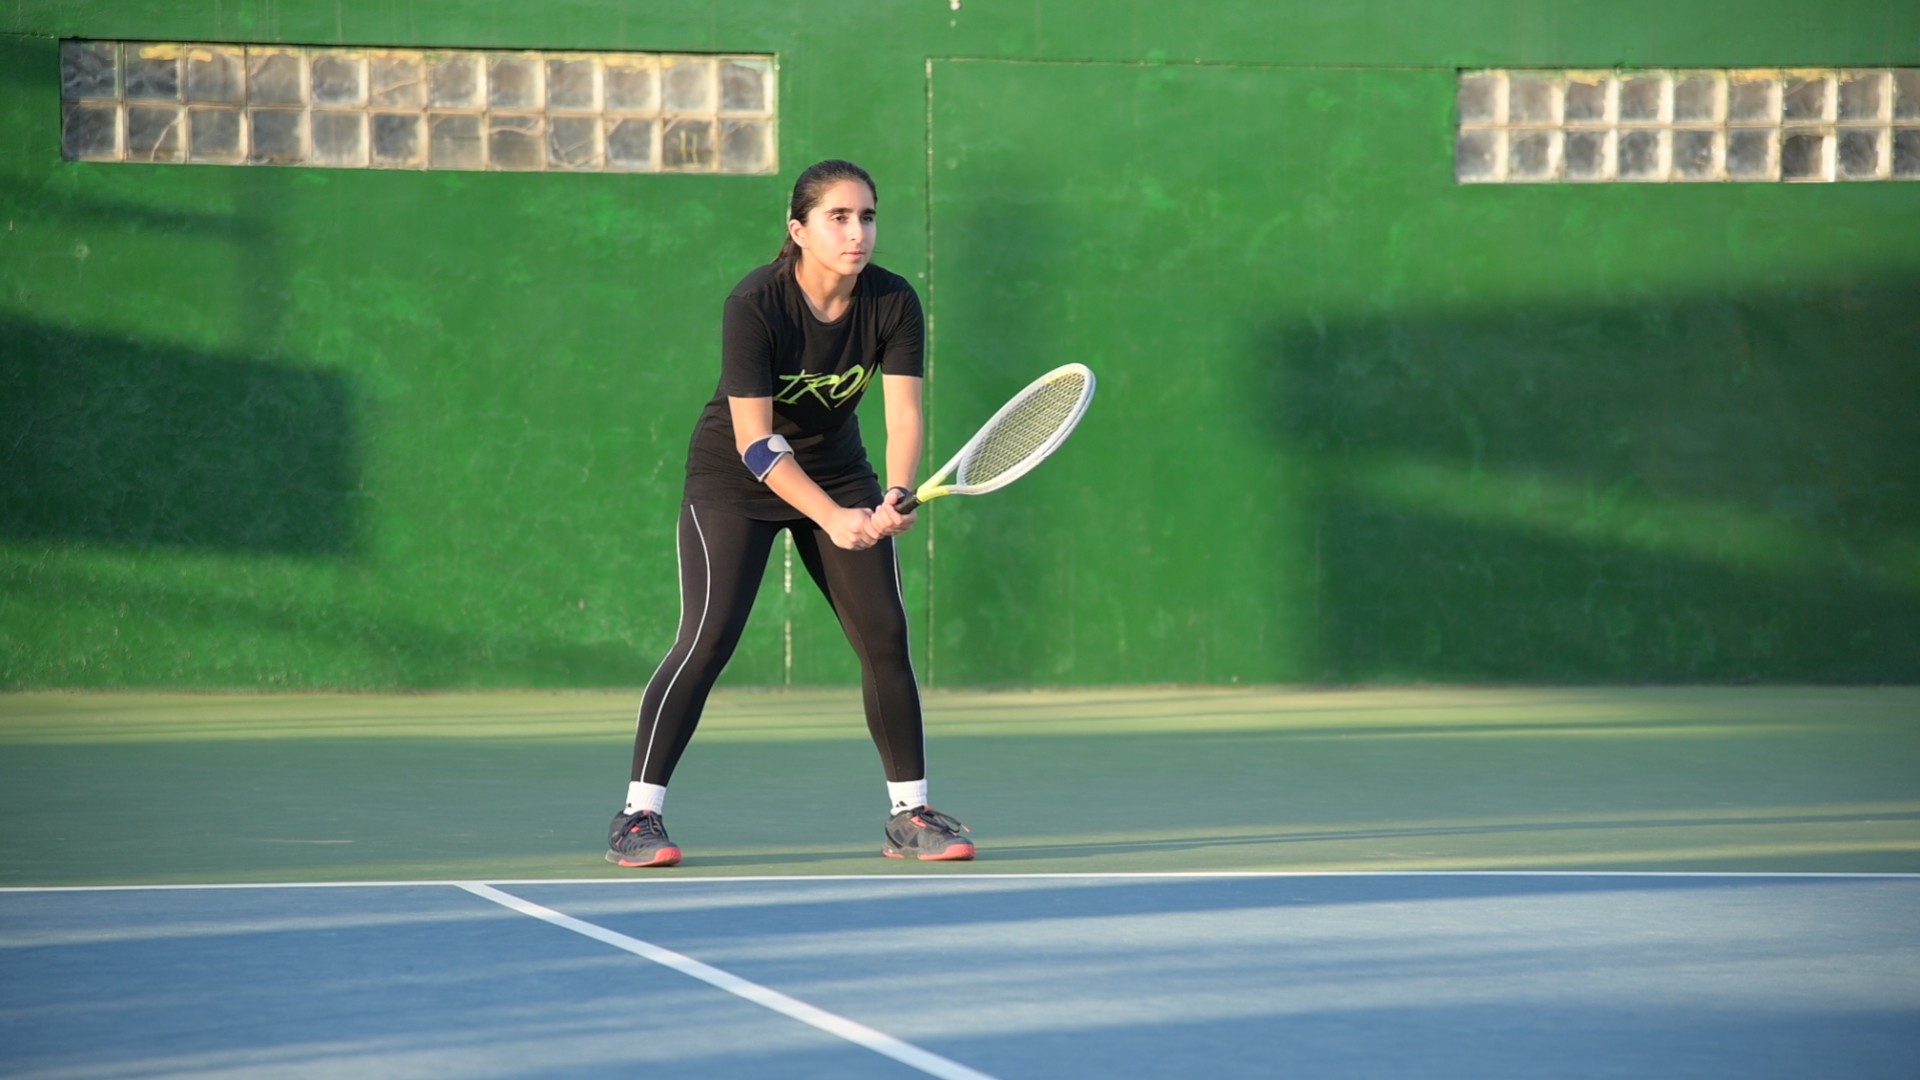 A player playing tennis